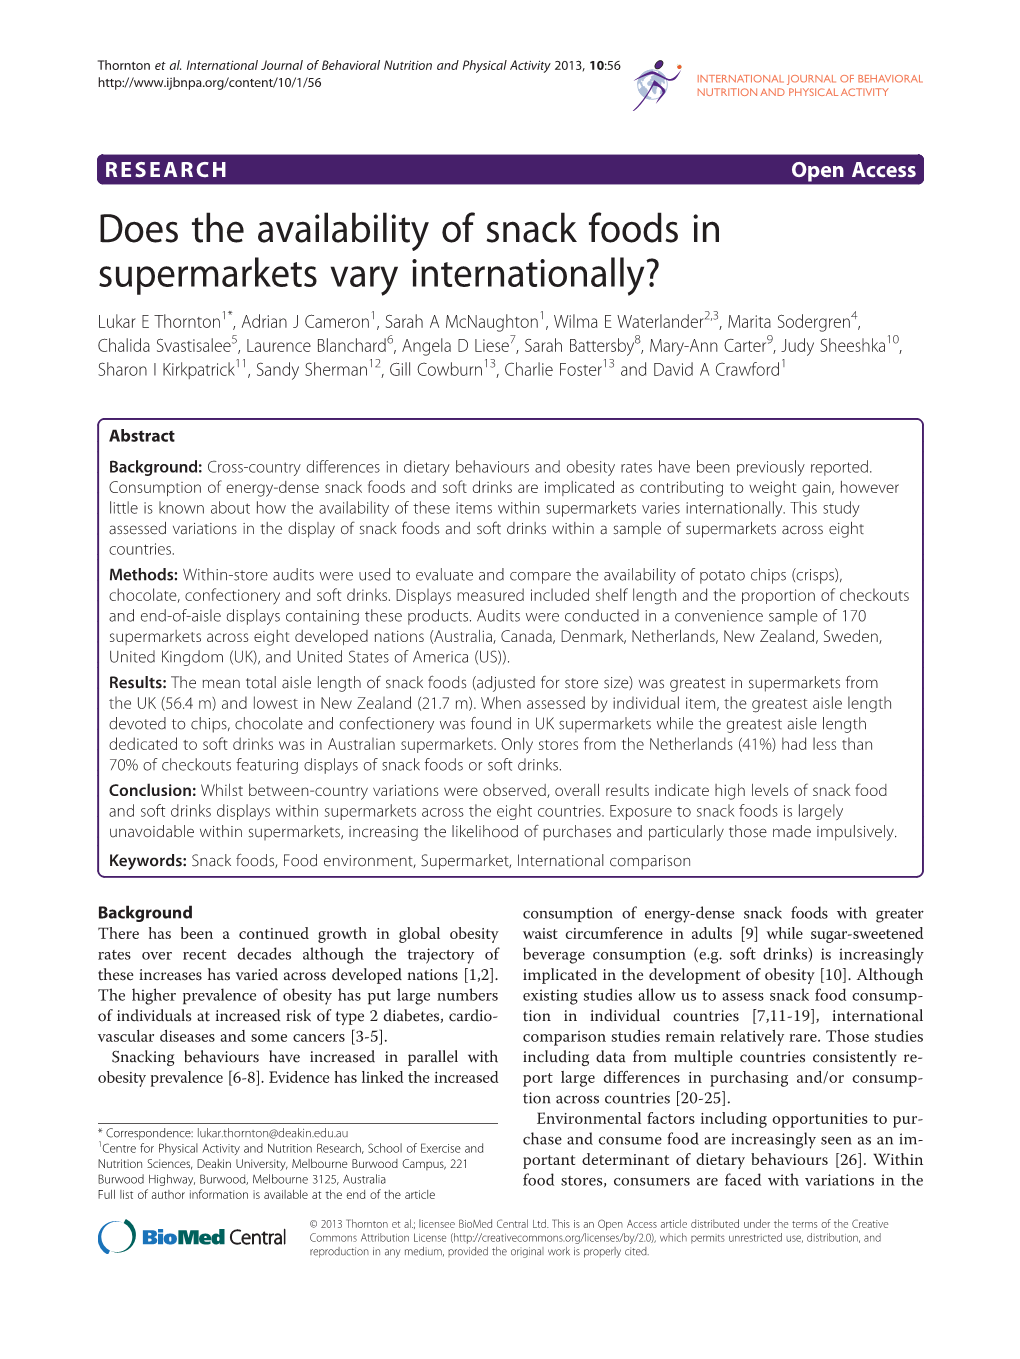 Does the Availability of Snack Foods in Supermarkets Vary Internationally?